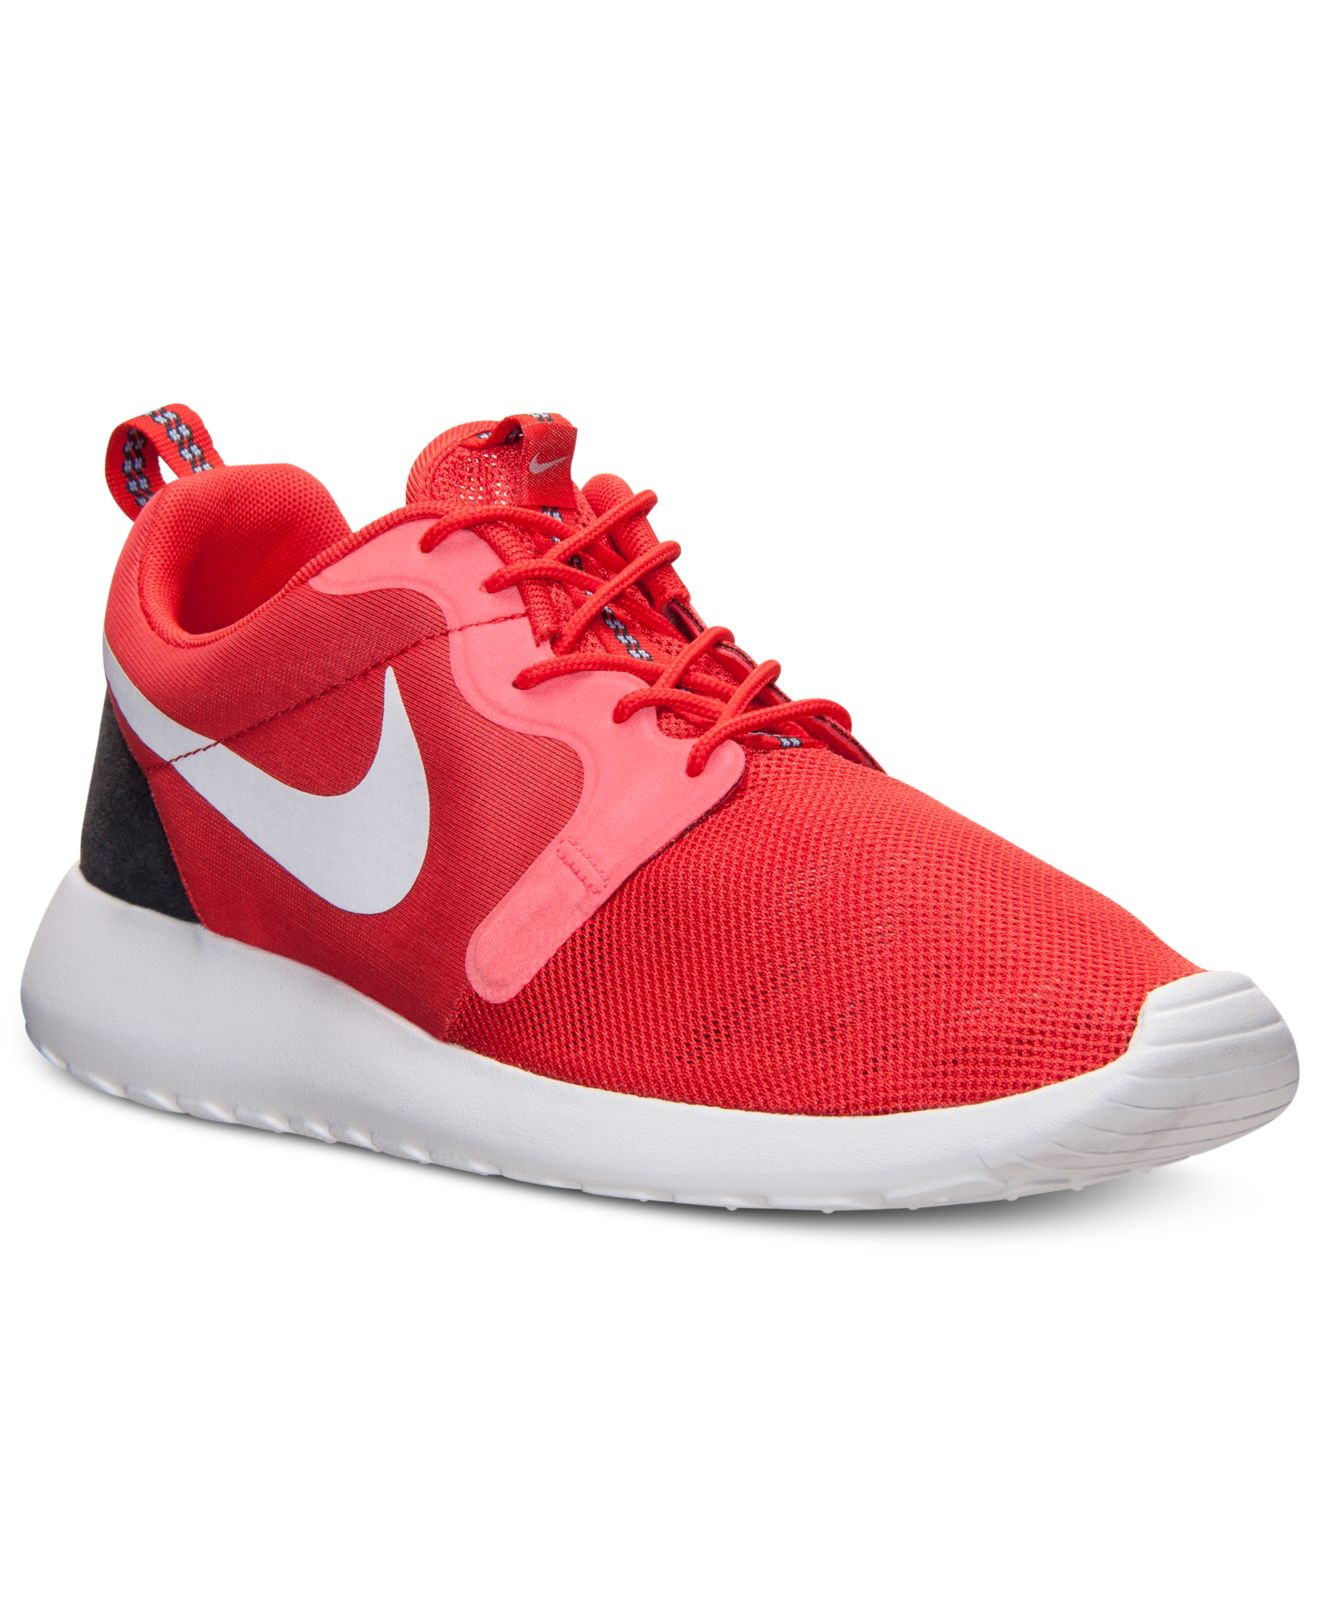 Lyst - Nike Men'S Rosherun Hyperfuse Casual Sneakers From Finish Line ...